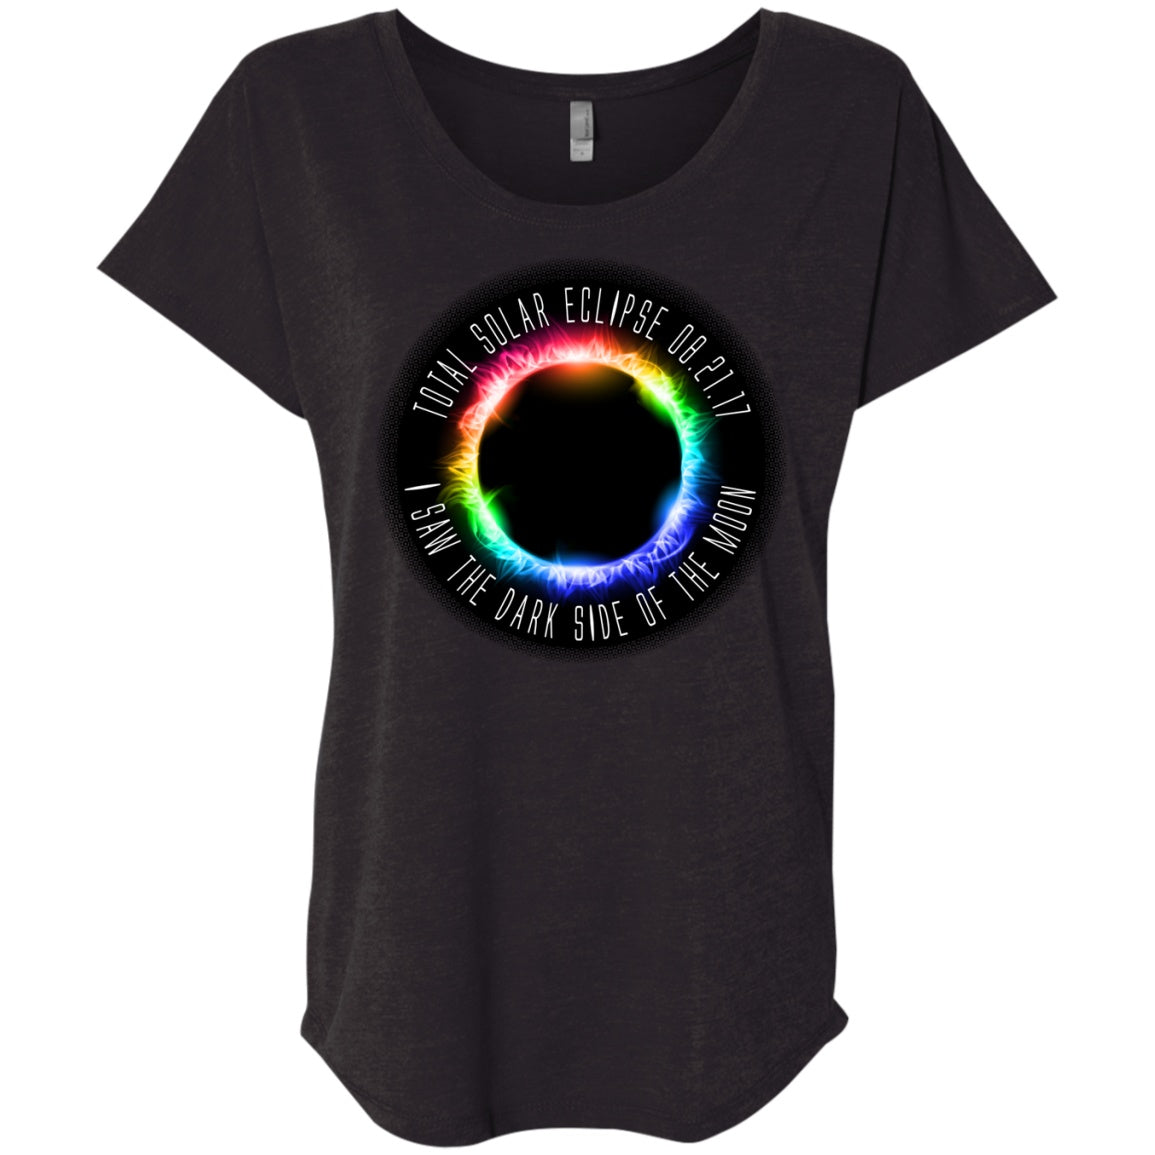 I Saw The Dark Side Of The Moon - Solar Eclipse Shirt for Men women - GoneBold.gift